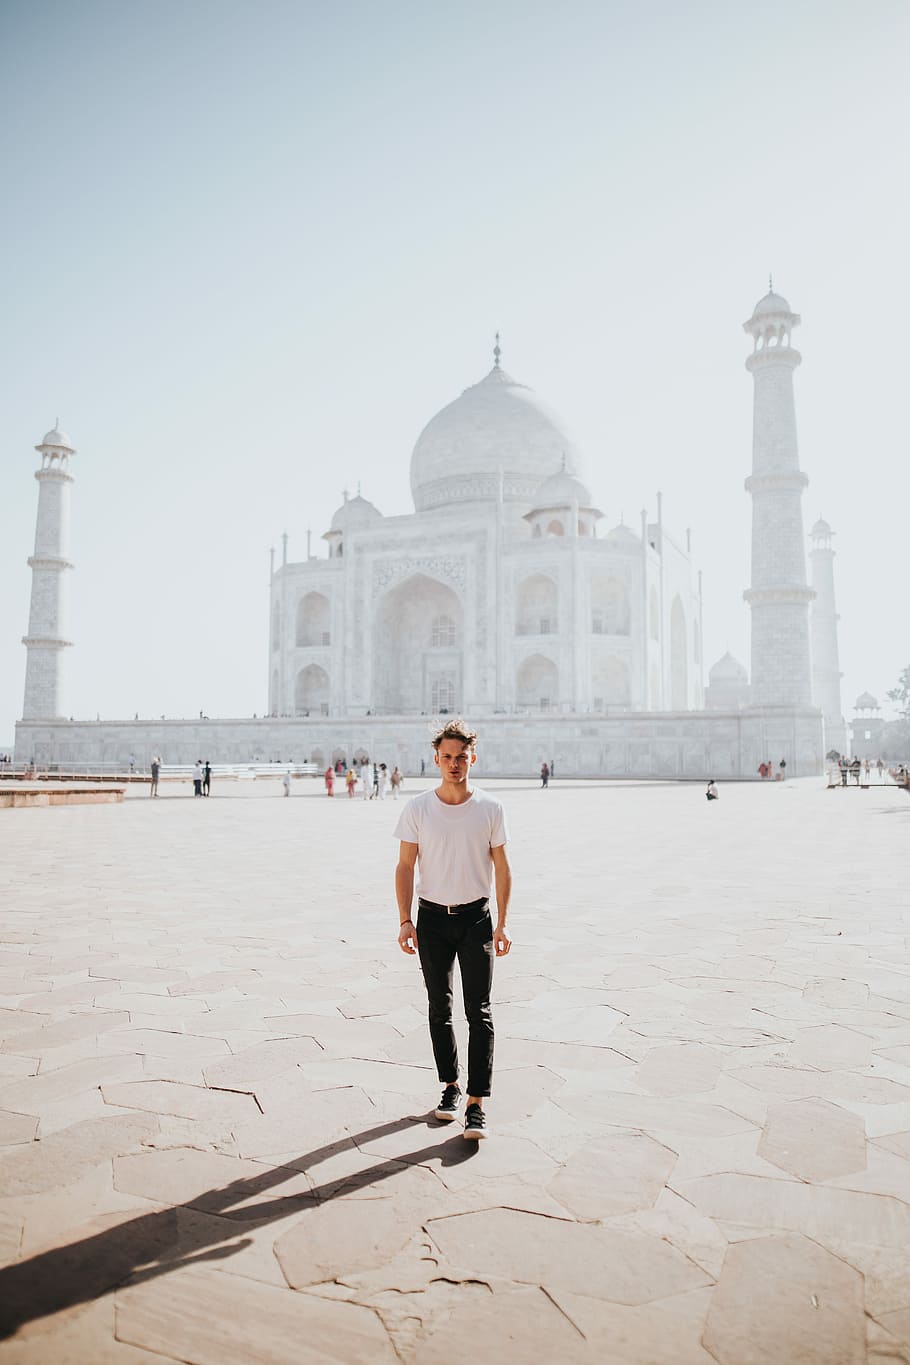 man standing near Taj Mahal, India, white concrete dome church behind man wearing white t-shirt and black pants standing on ground during daytime, HD wallpaper